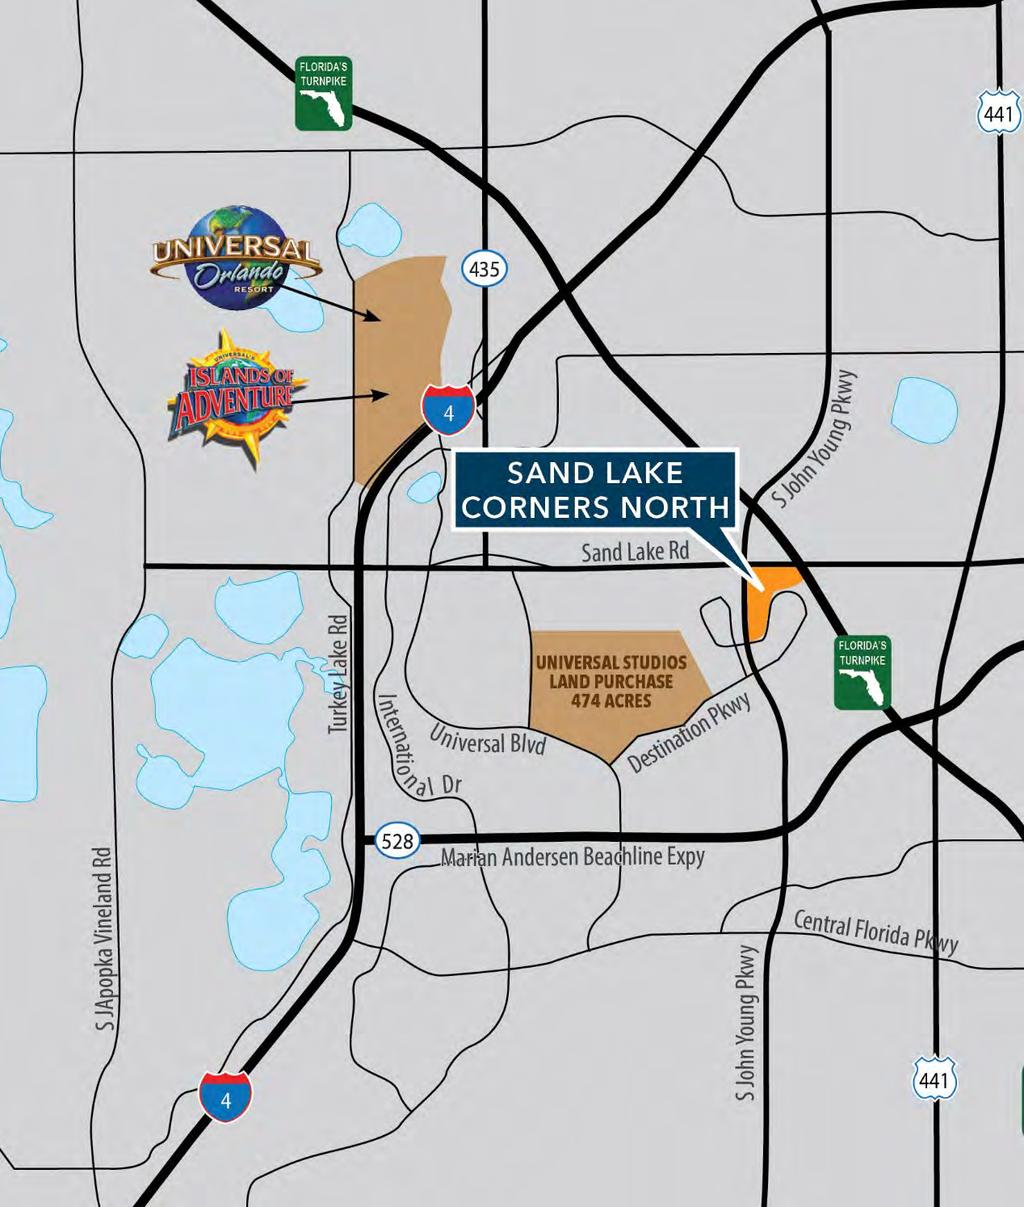 Sand Lake Corners North Gateway to the 474 Acre Universal Site Massive Unlocked Value Upon Development Universal Acquisition: 475 Acres Purchased Universal Orlando's corporate owner paid $130 million